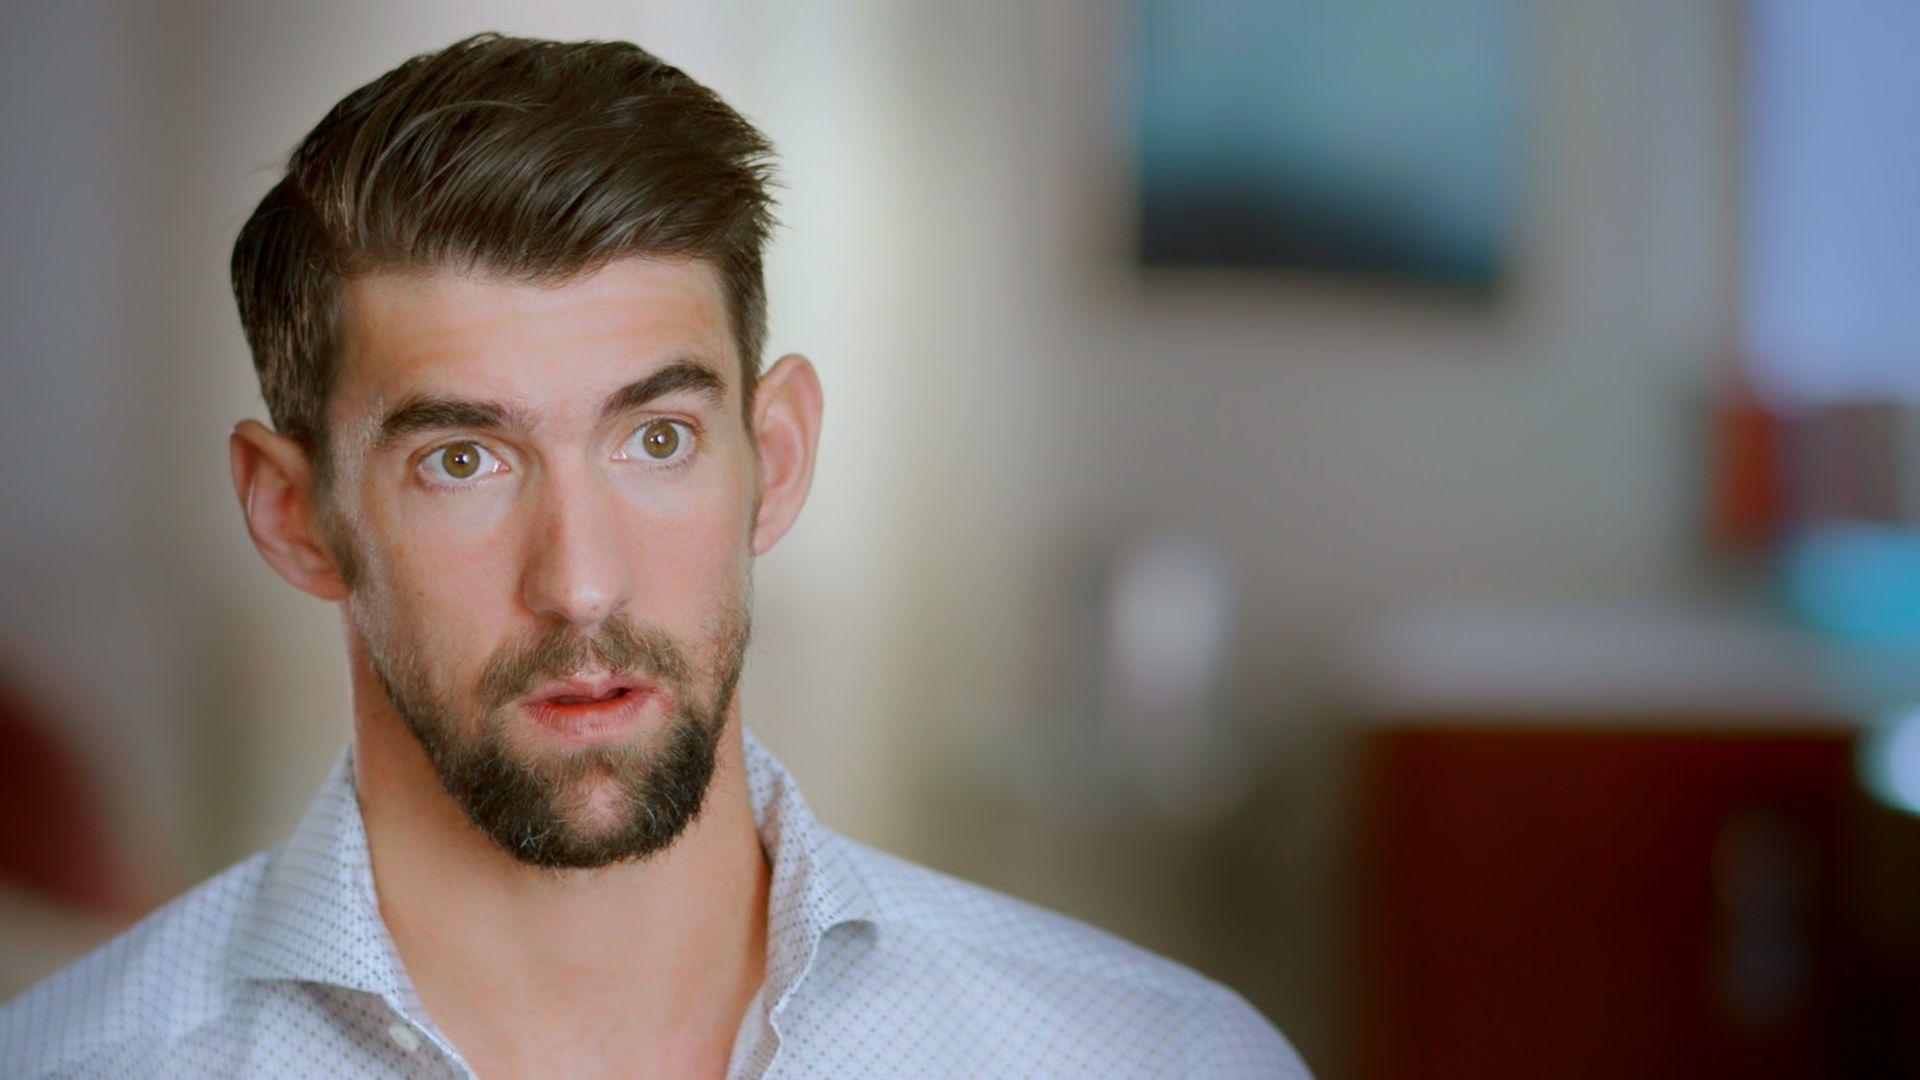 Michael Phelps Gets Candid About His Struggles in the Spotlight - The